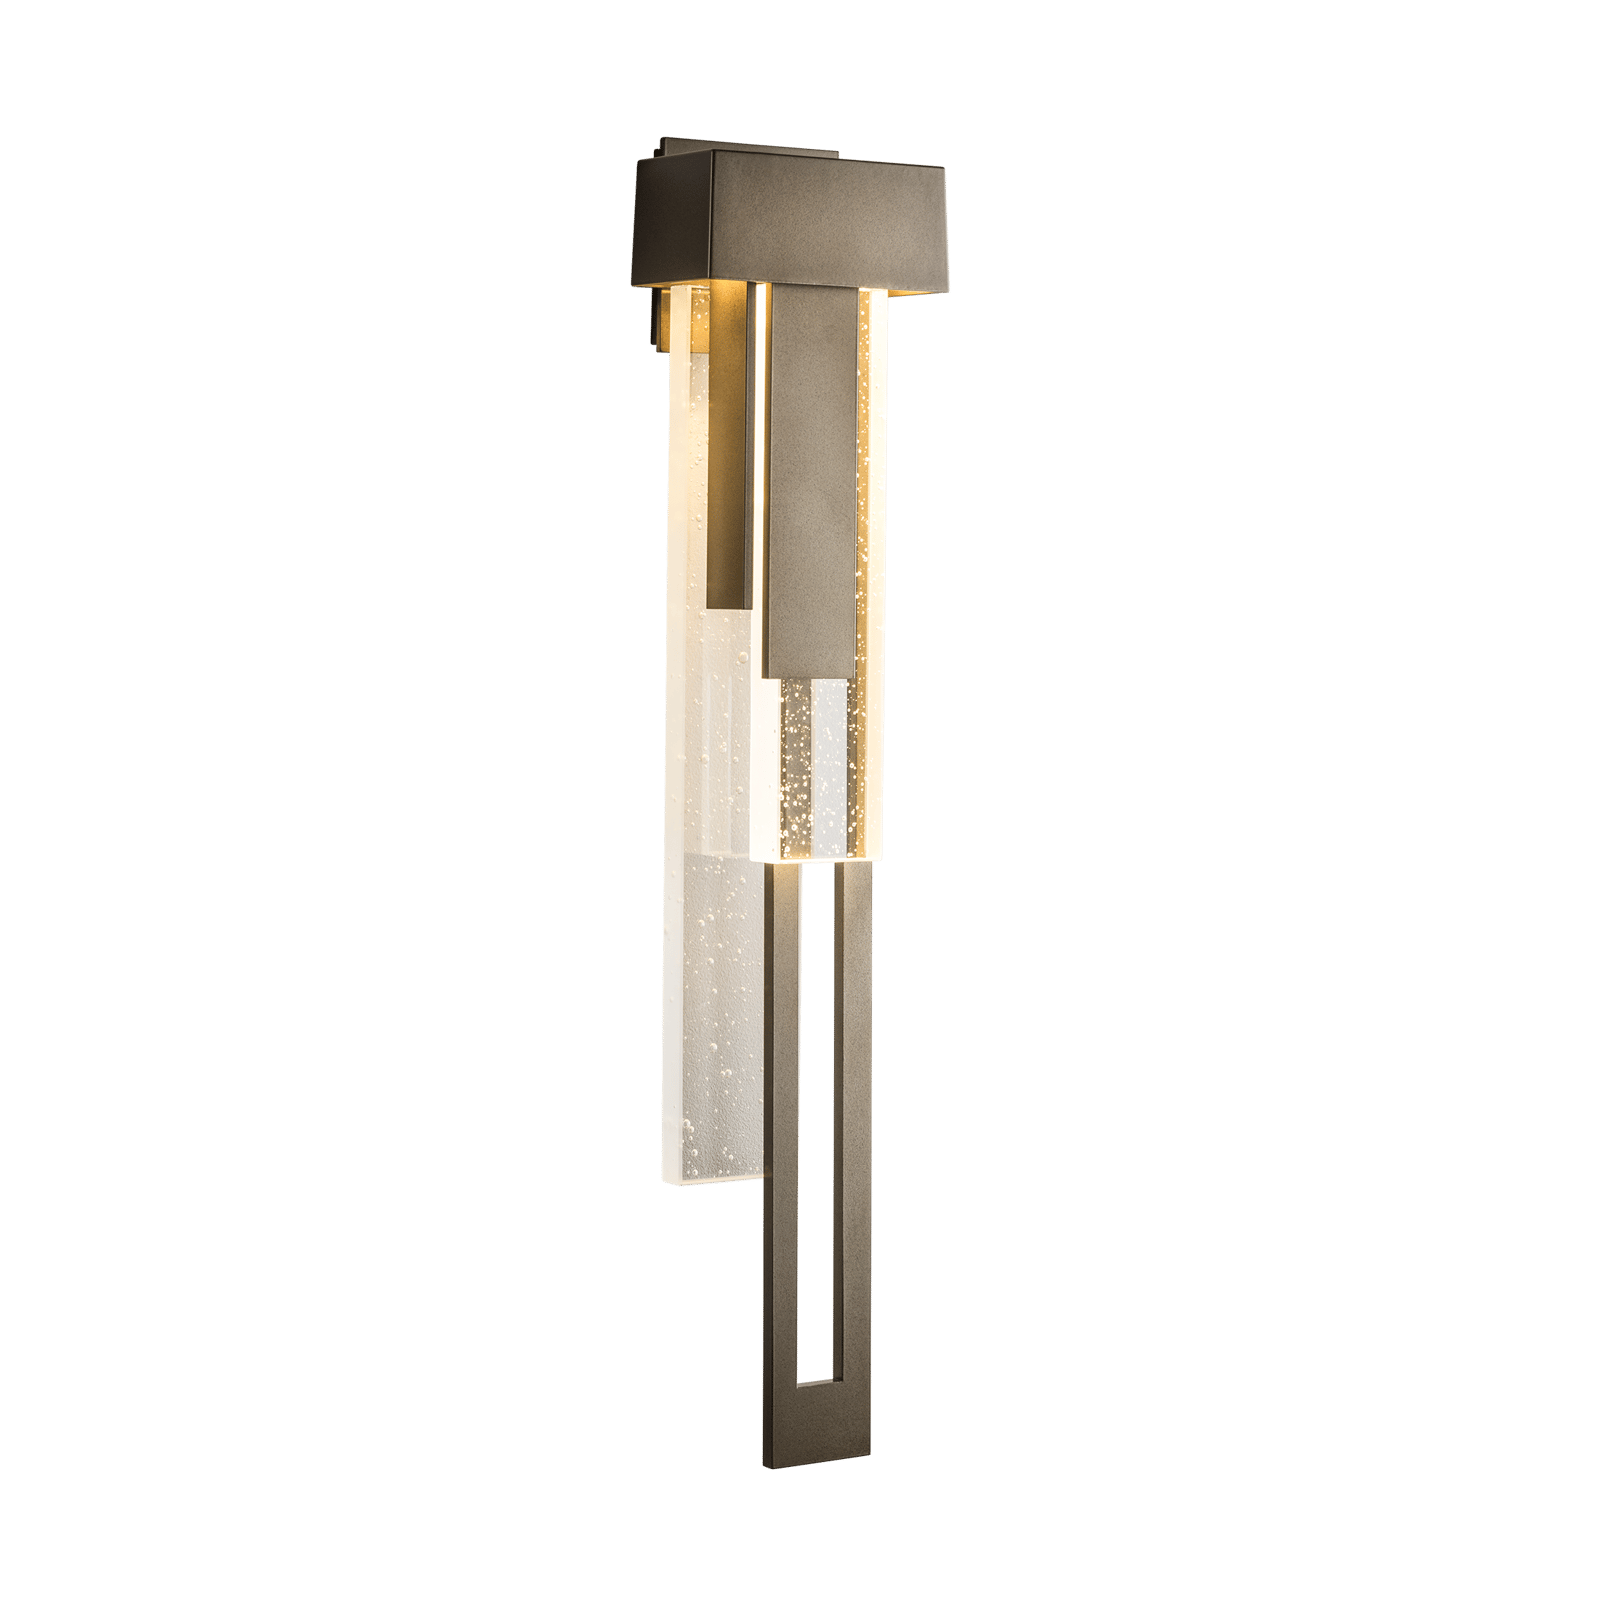 Hubbardton Forge Rainfall Large LED Outdoor Sconce - Right Orientation